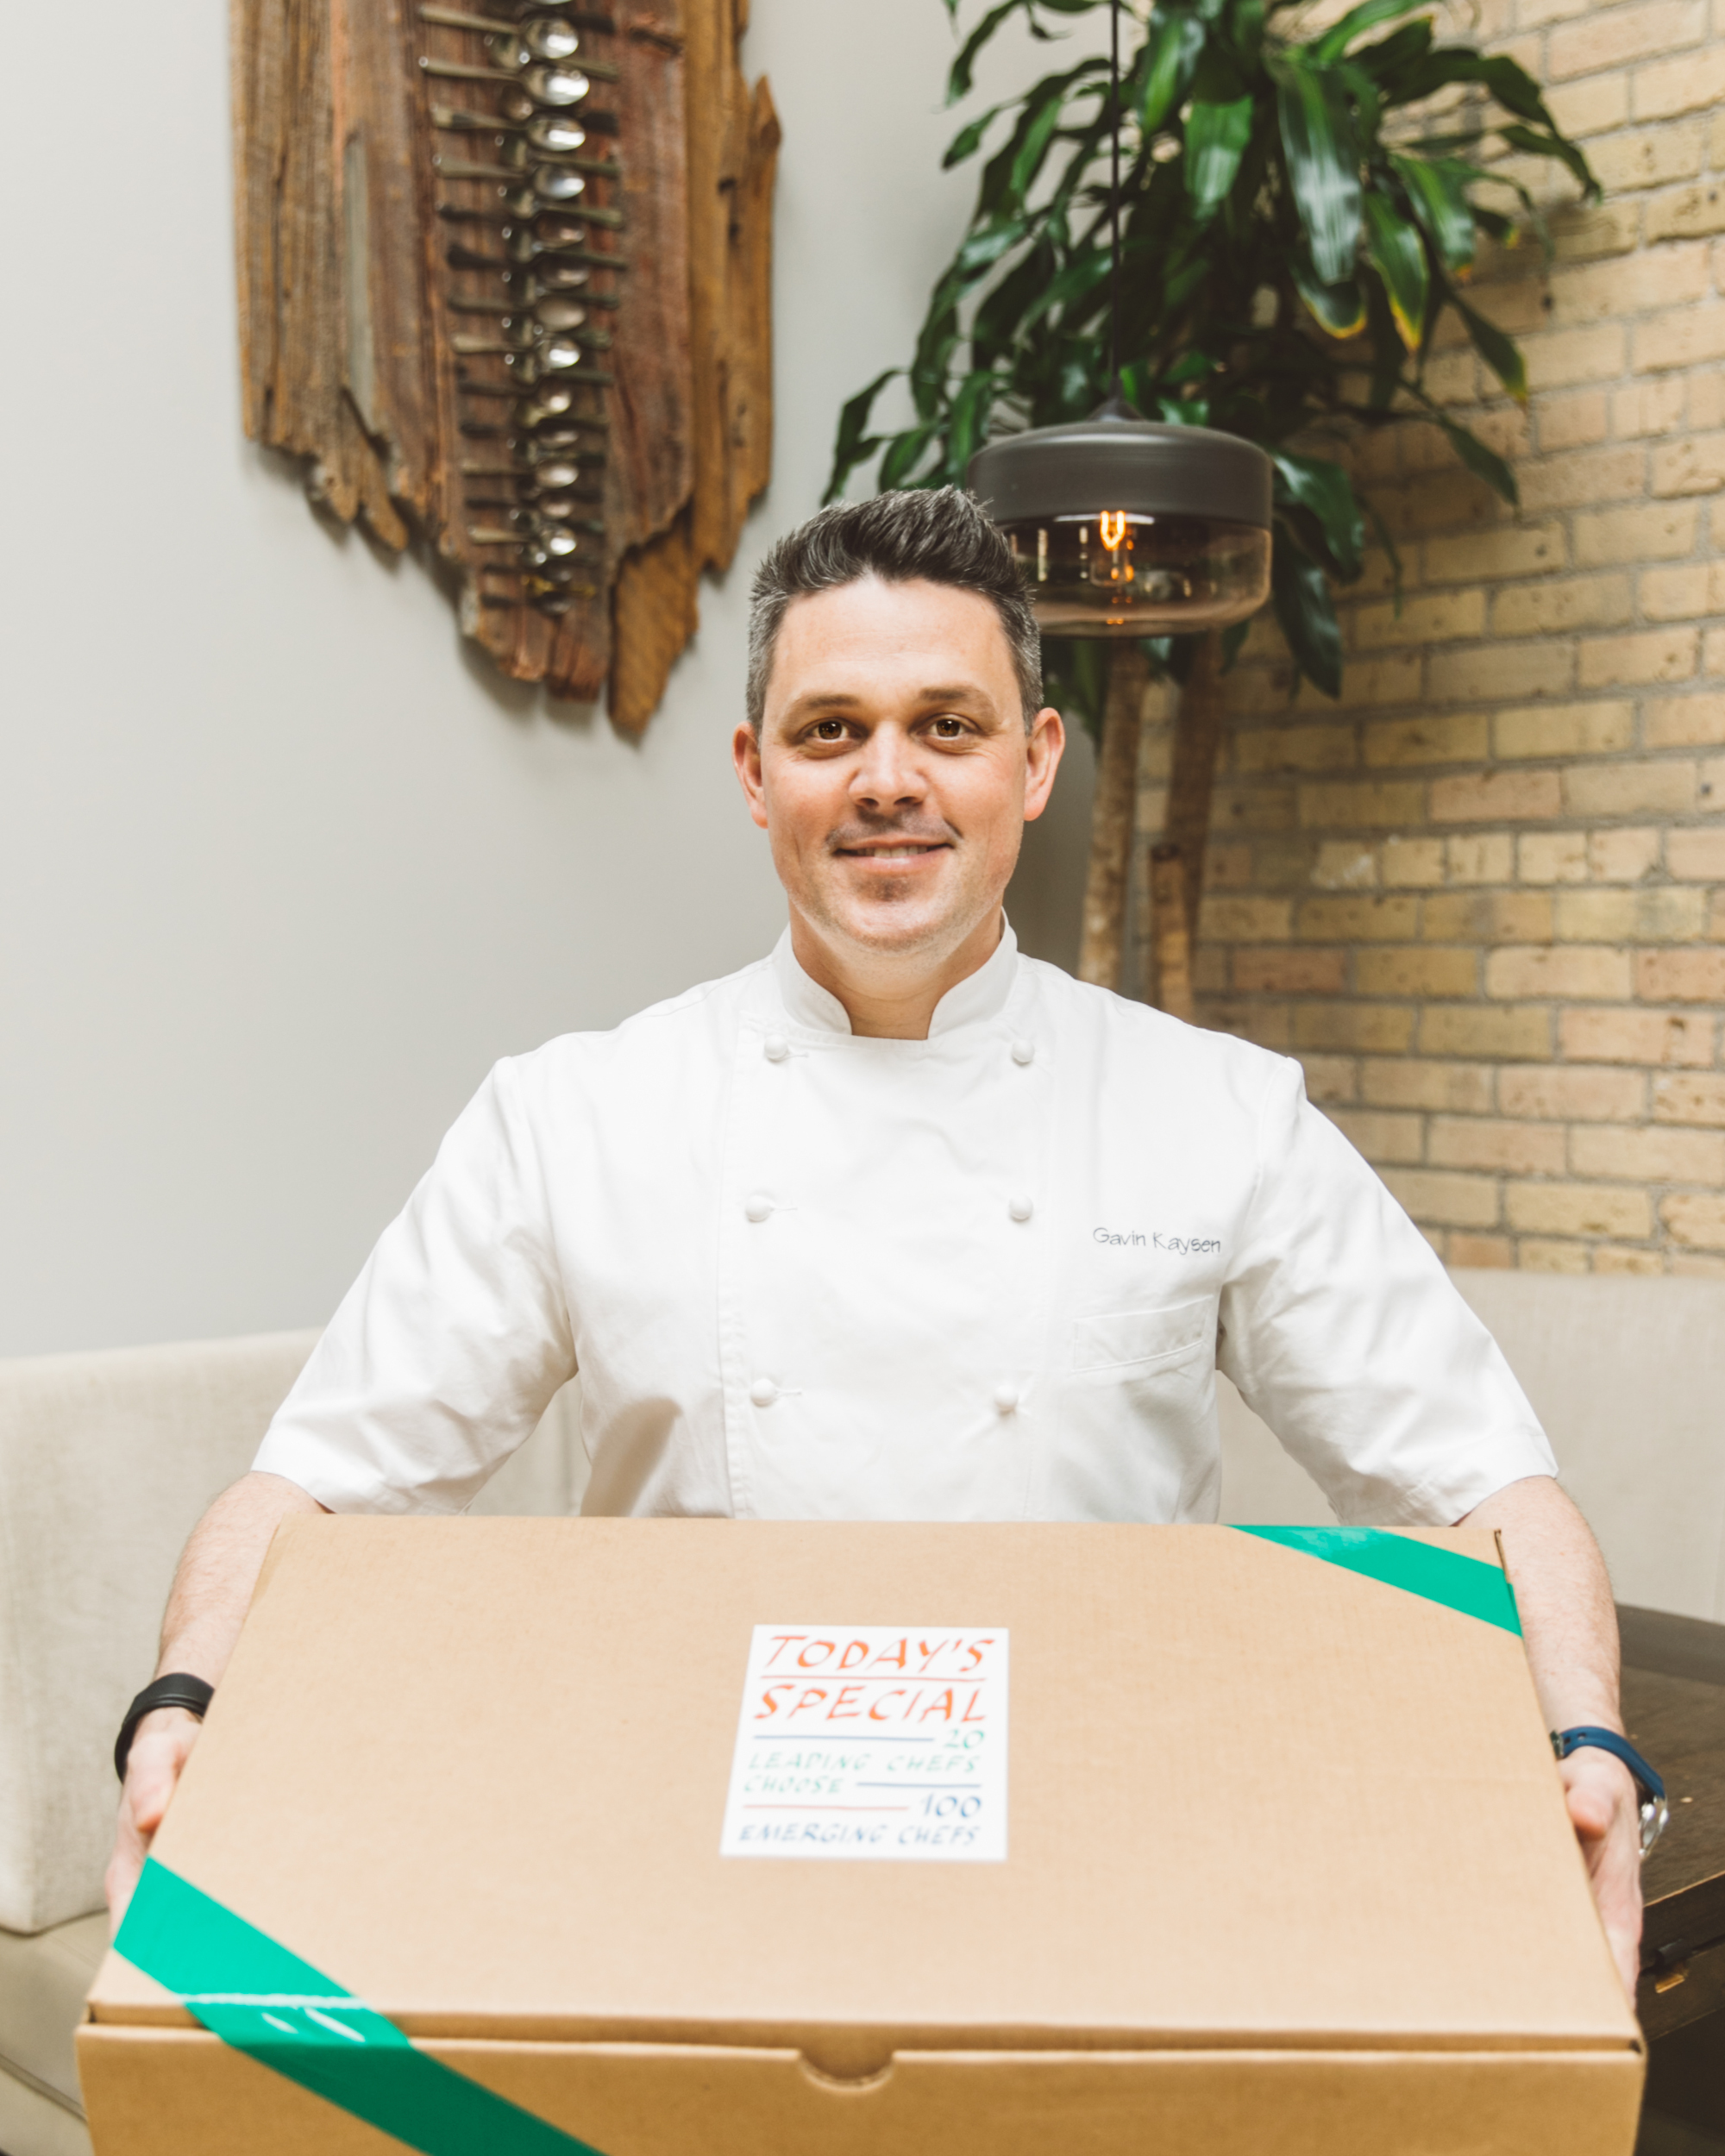 Chef Gavin Kaysen with his Today's Special meal kit box